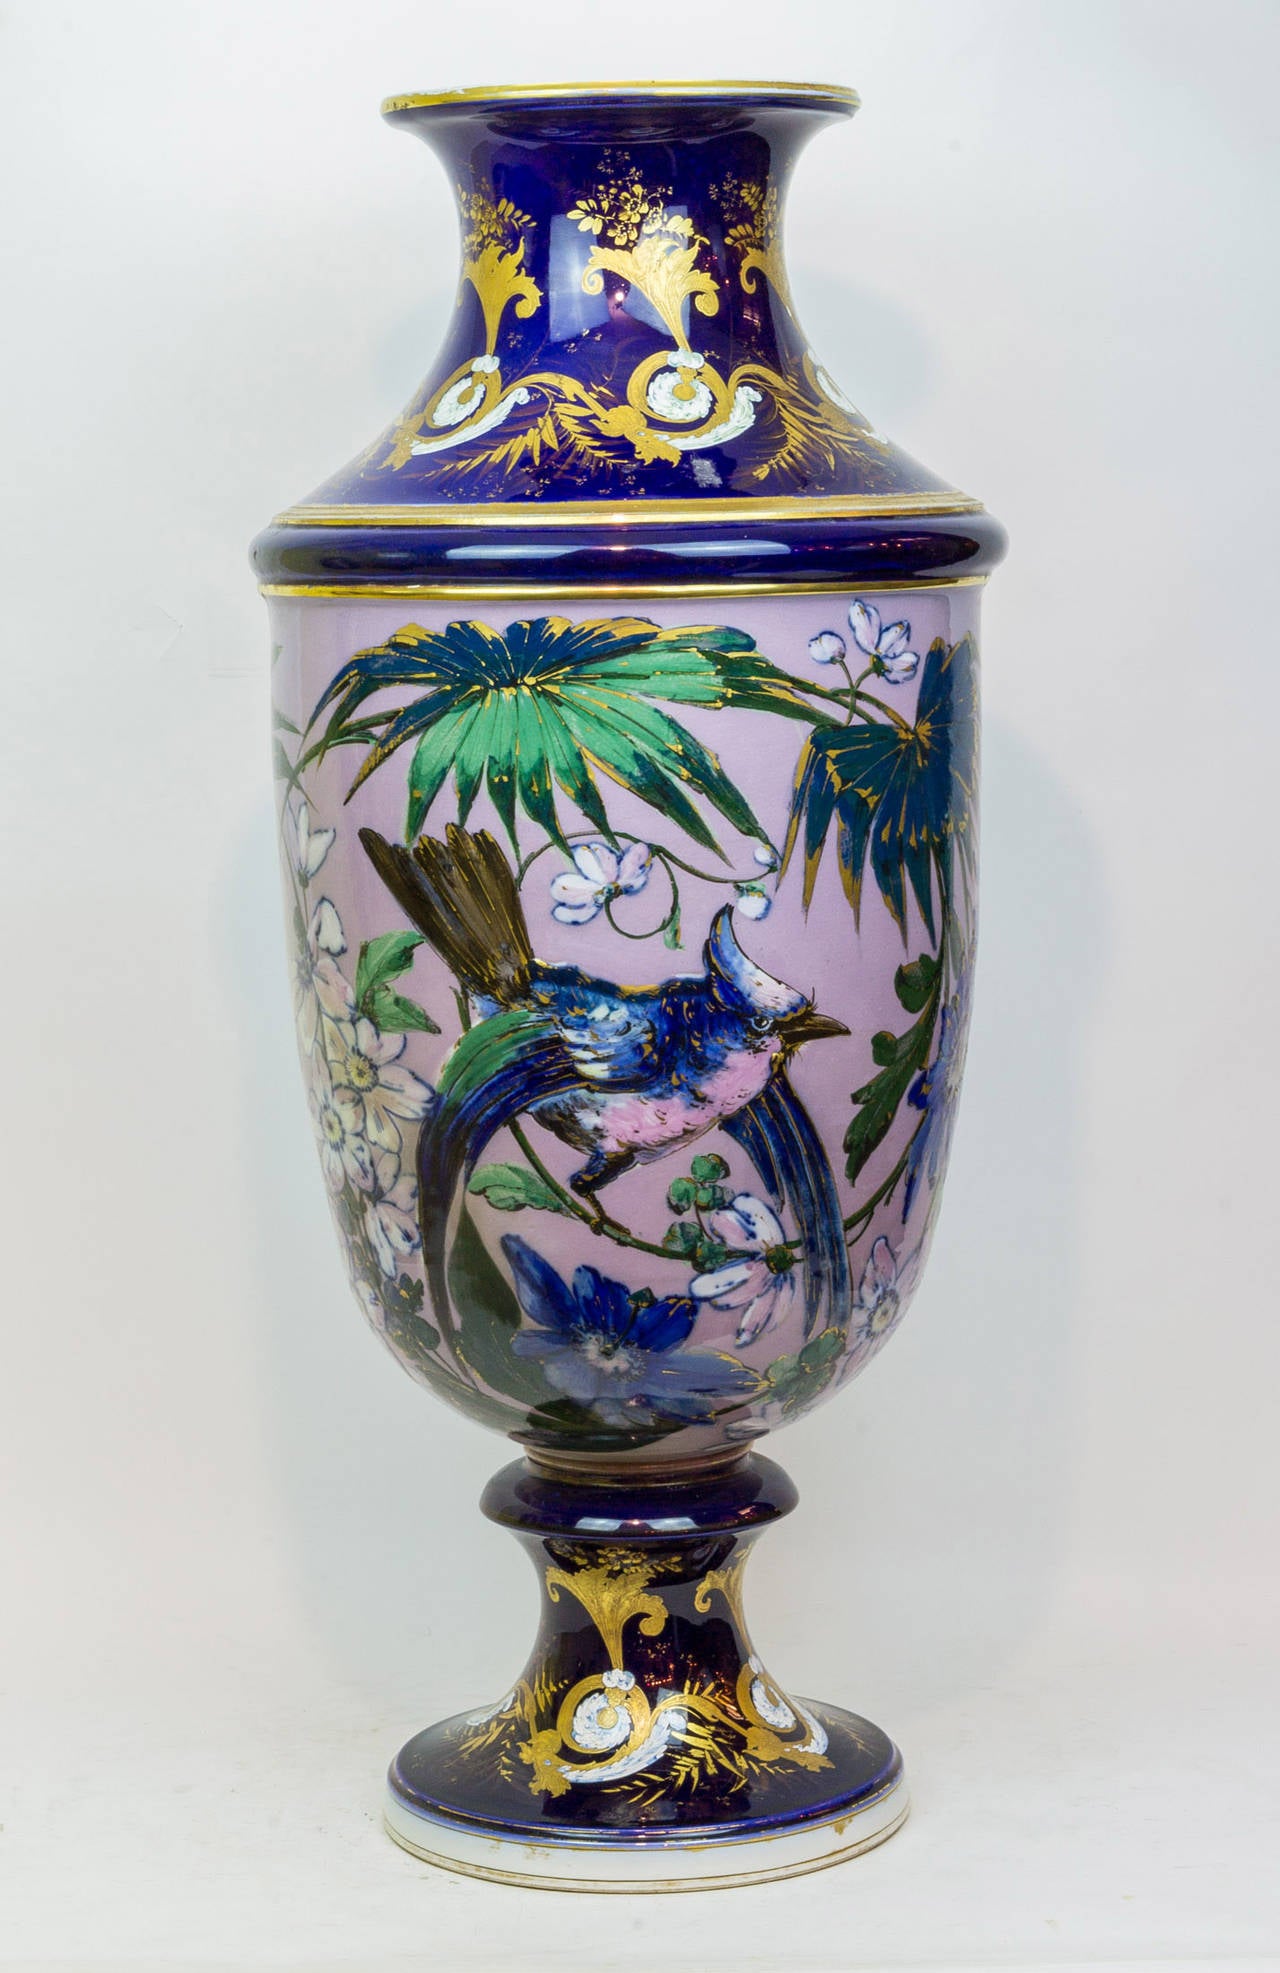 A large and unusual Aesthetic Movement porcelain vase with hand-painted floral and bird decorations.
Stock number: PP31.